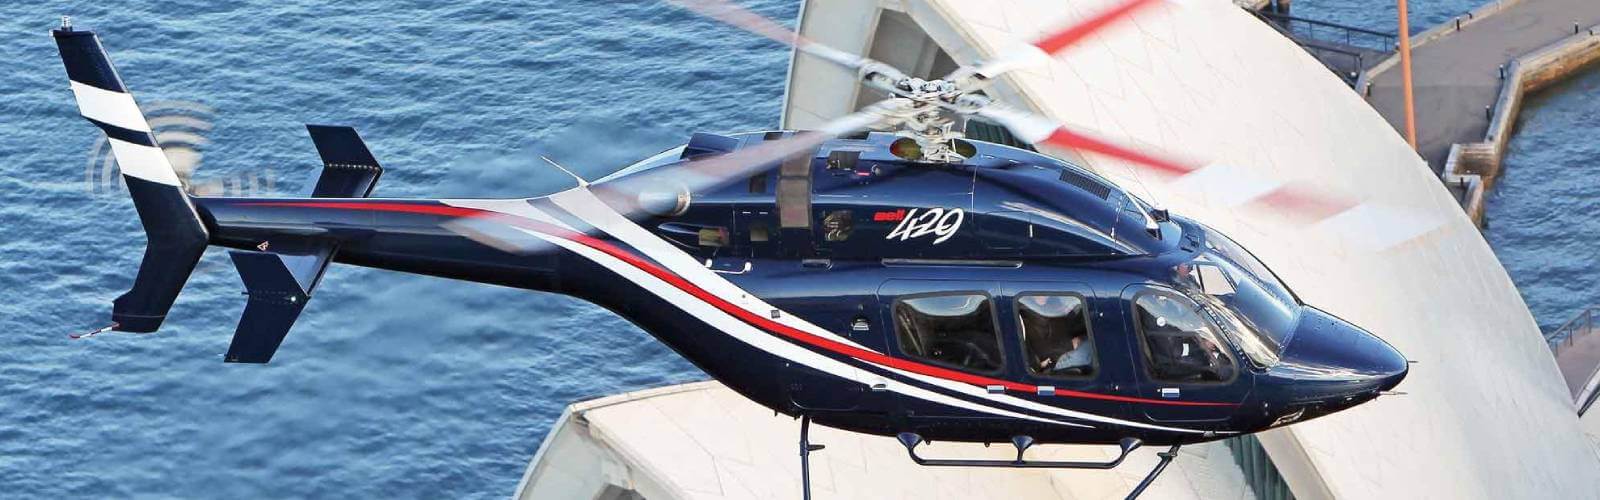 Why HUMS should be standard on corporate/VIP helicopters and others rotorcraft used for executive transport